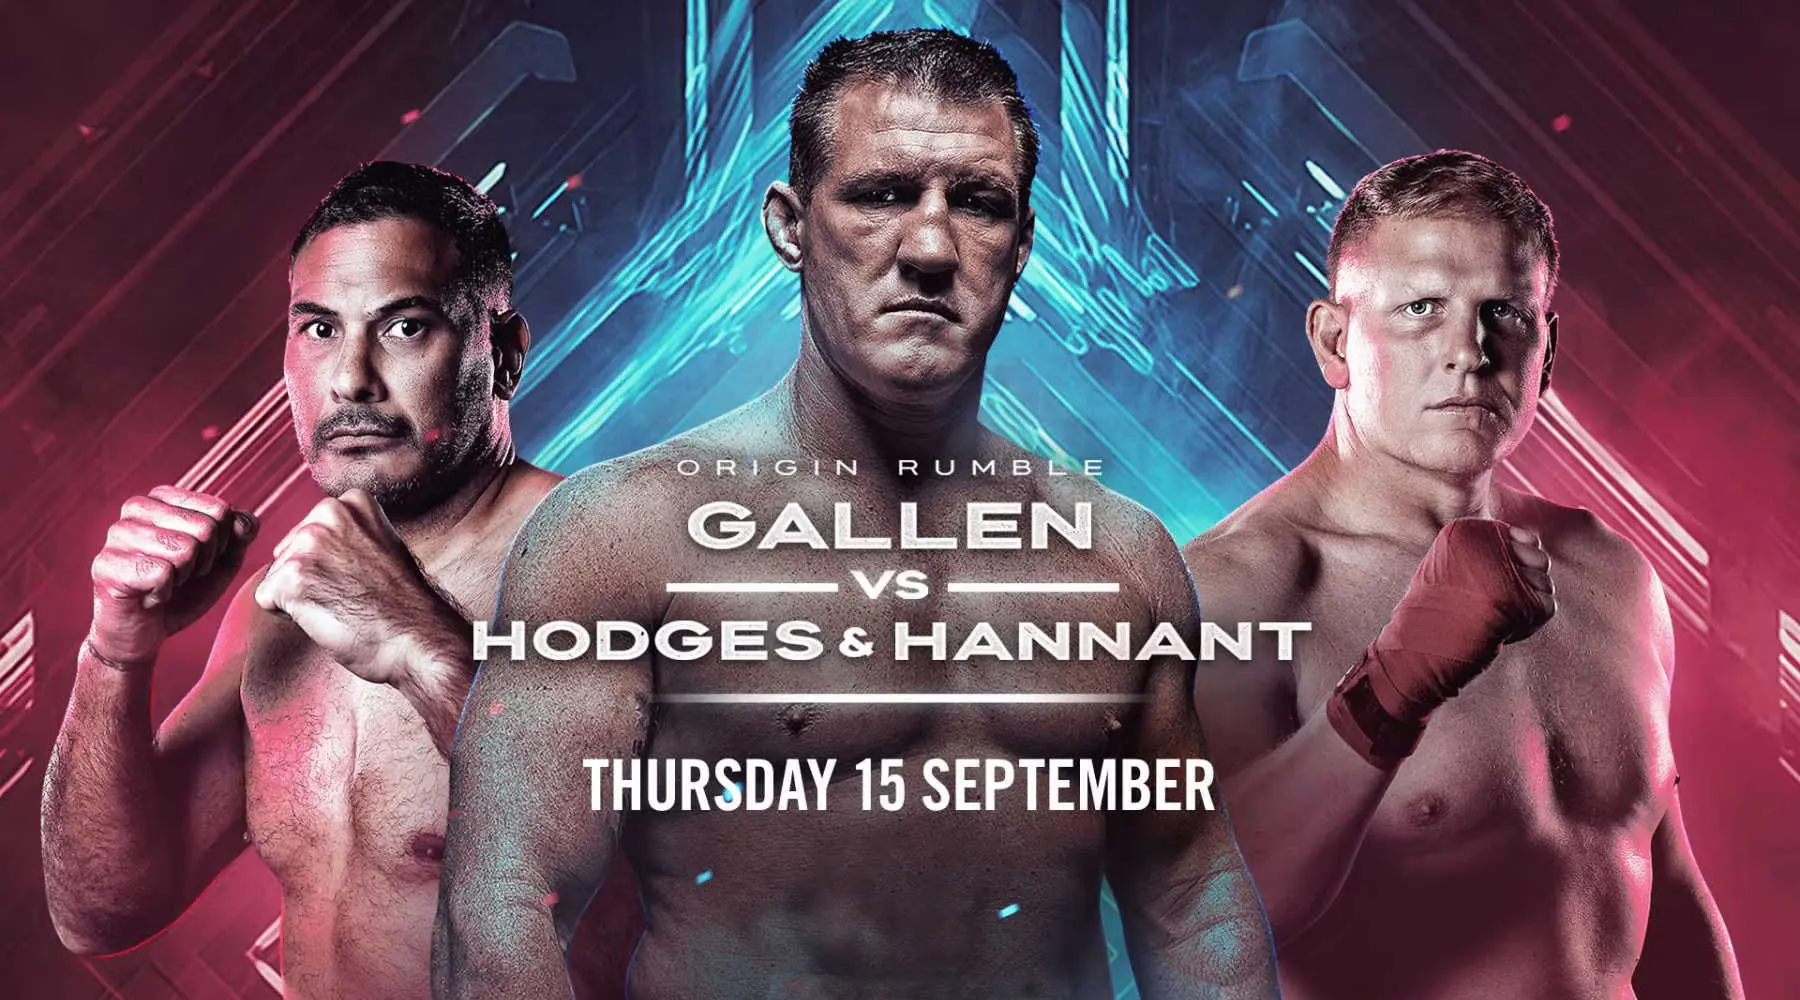 Origin Rumble How to watch Gallen vs Hodges and Hannant boxing live